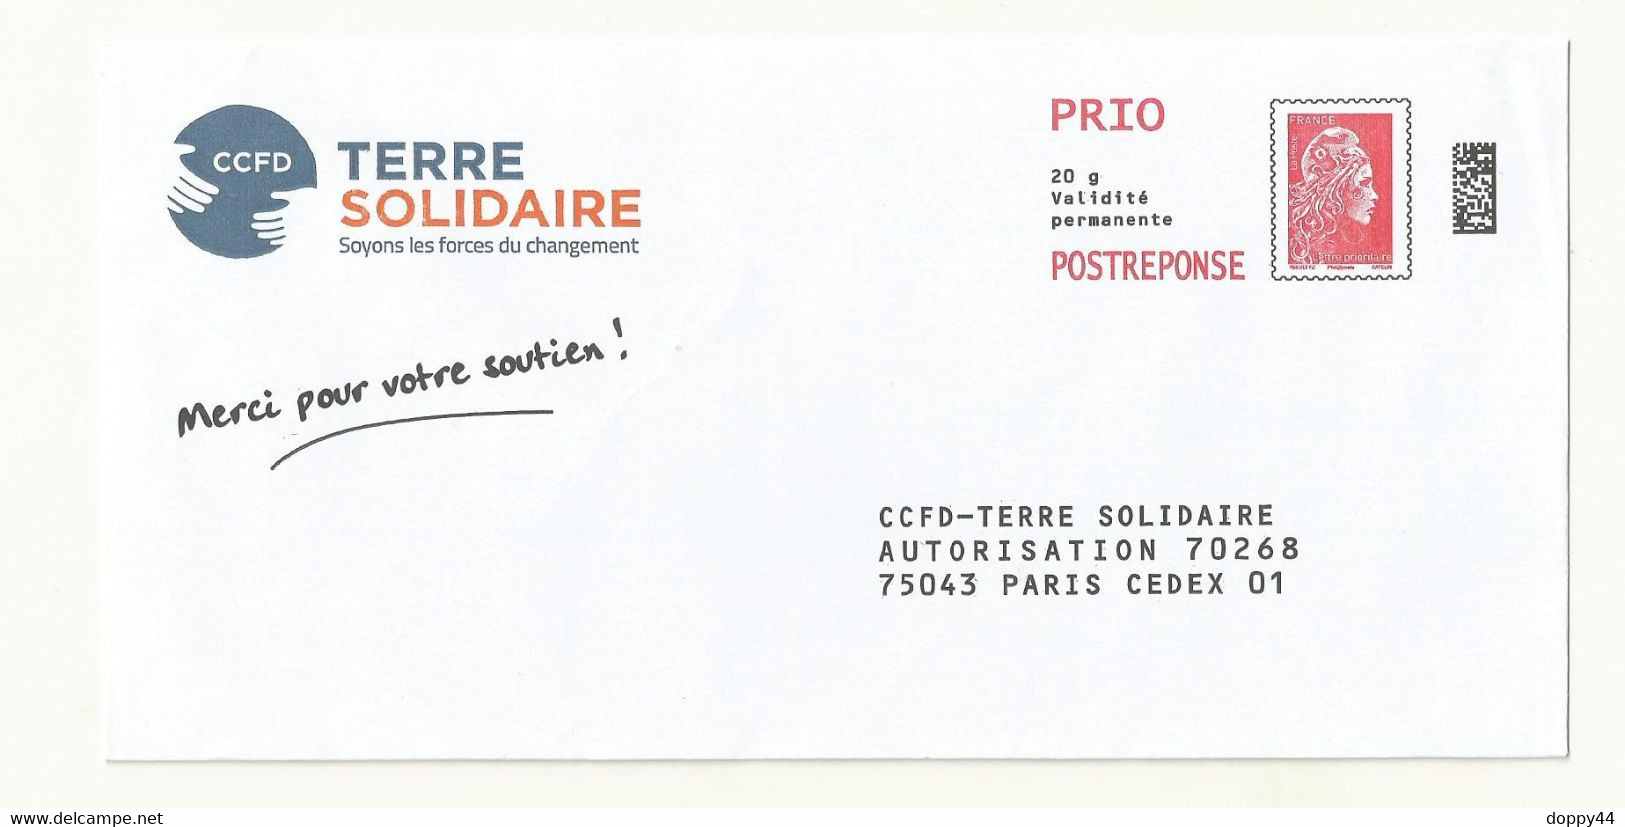 POSTREPONSE PRIO CCFD-TERRE SOLIDAIRE LOT 273030. - PAP: Ristampa/Marianne L'Engagée